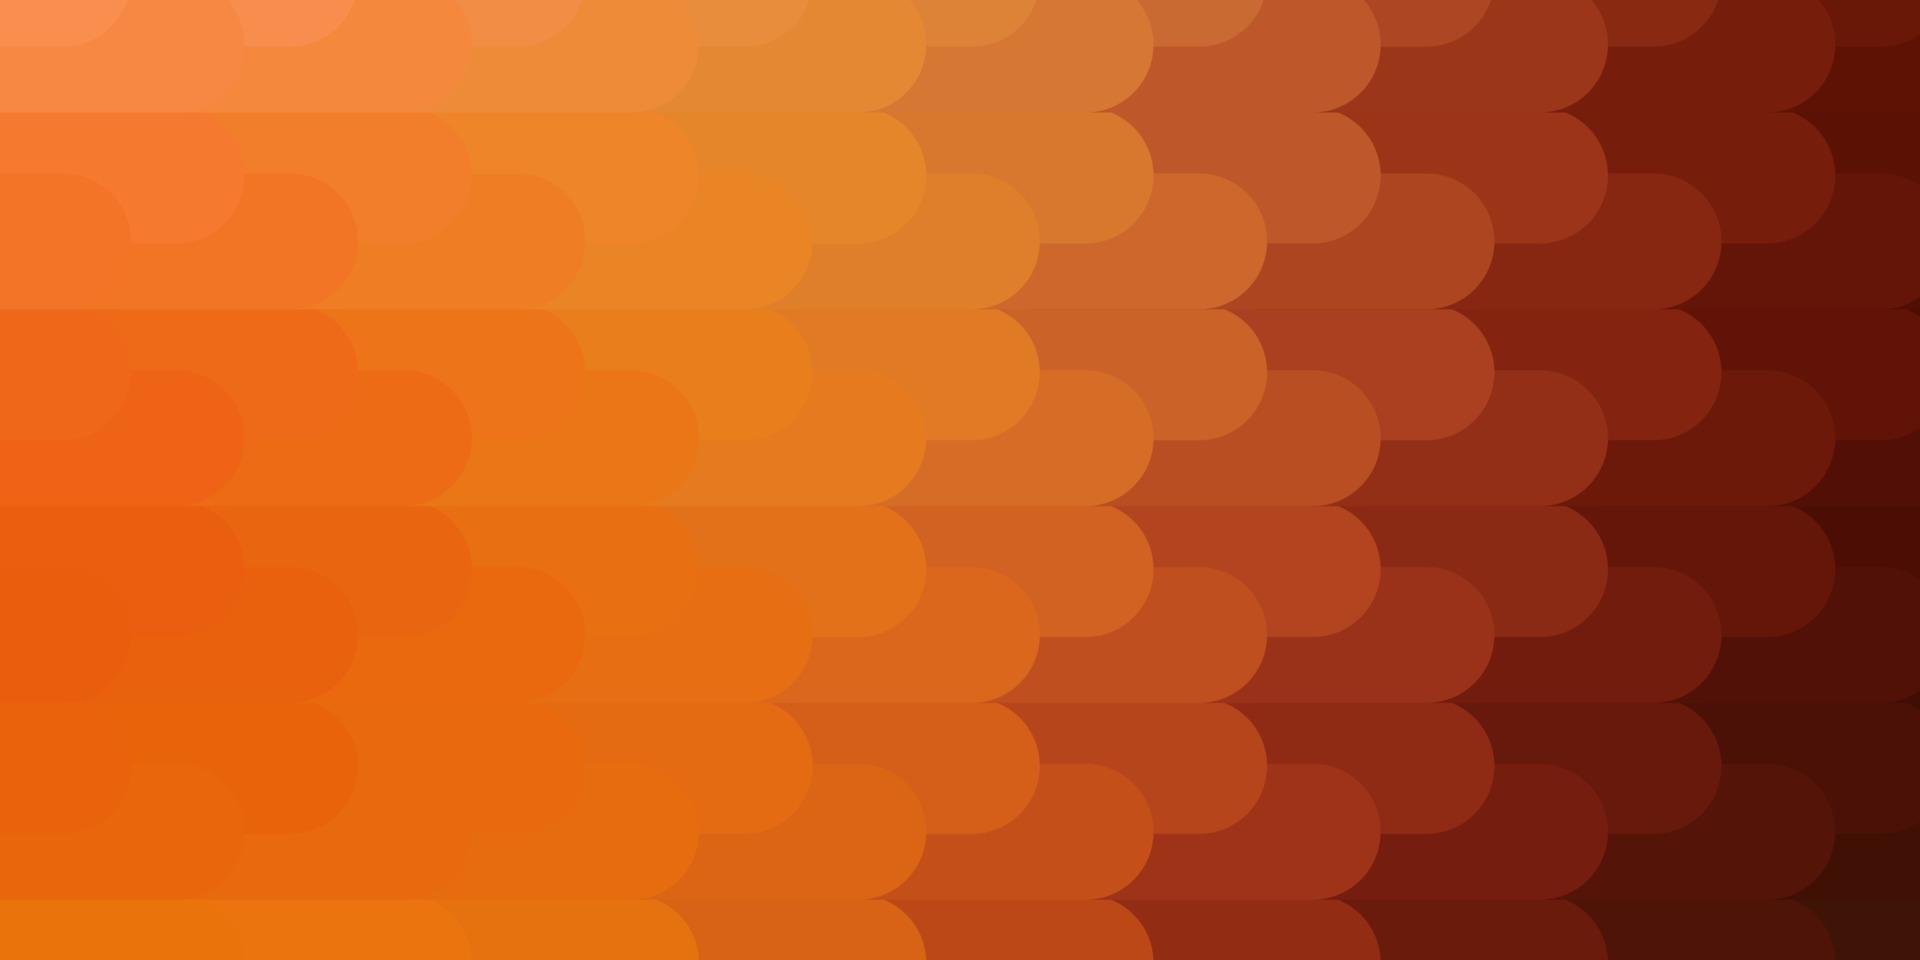 Light Orange vector background with lines.